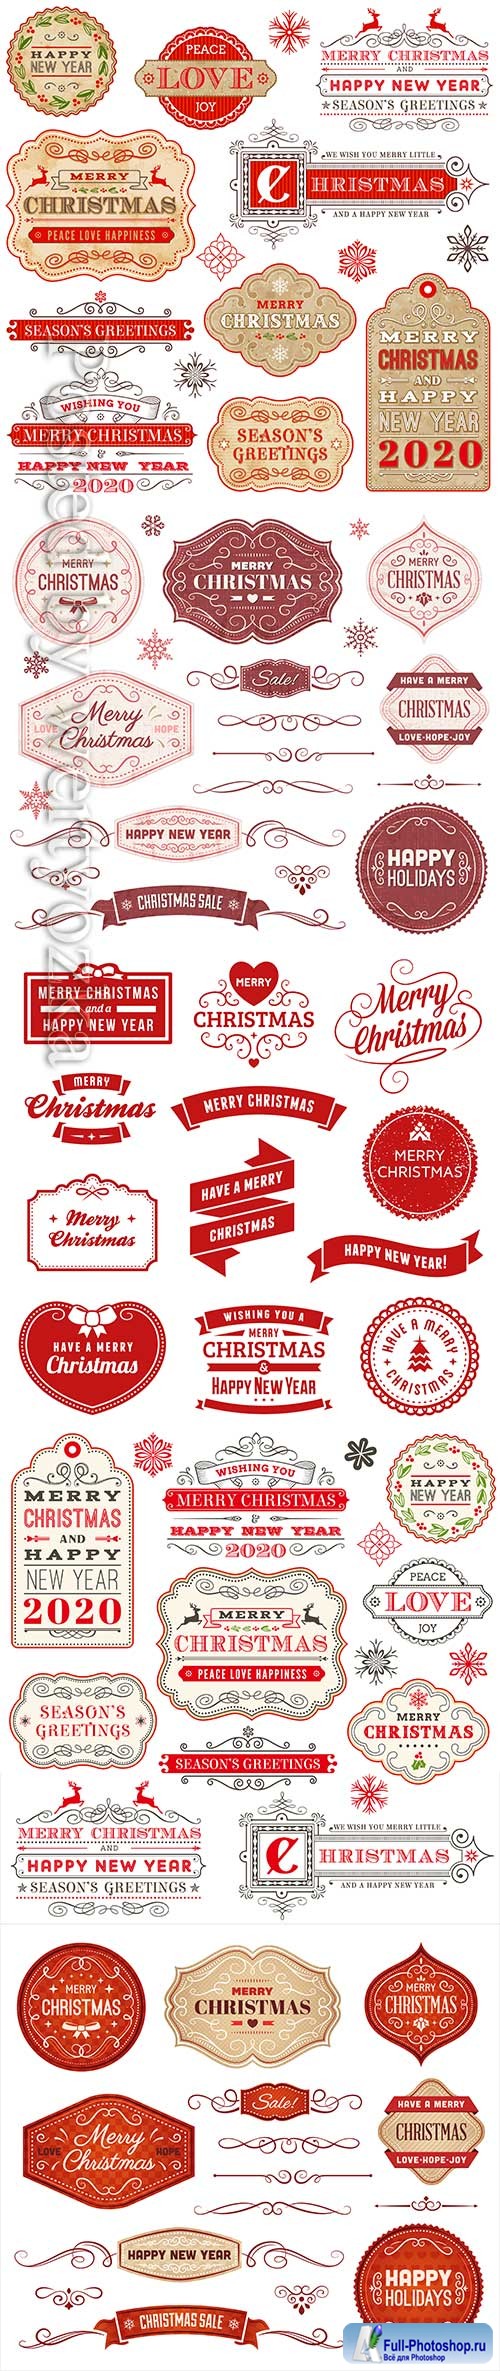 2020 Merry Chistmas and Happy New Year vector illustration # 15